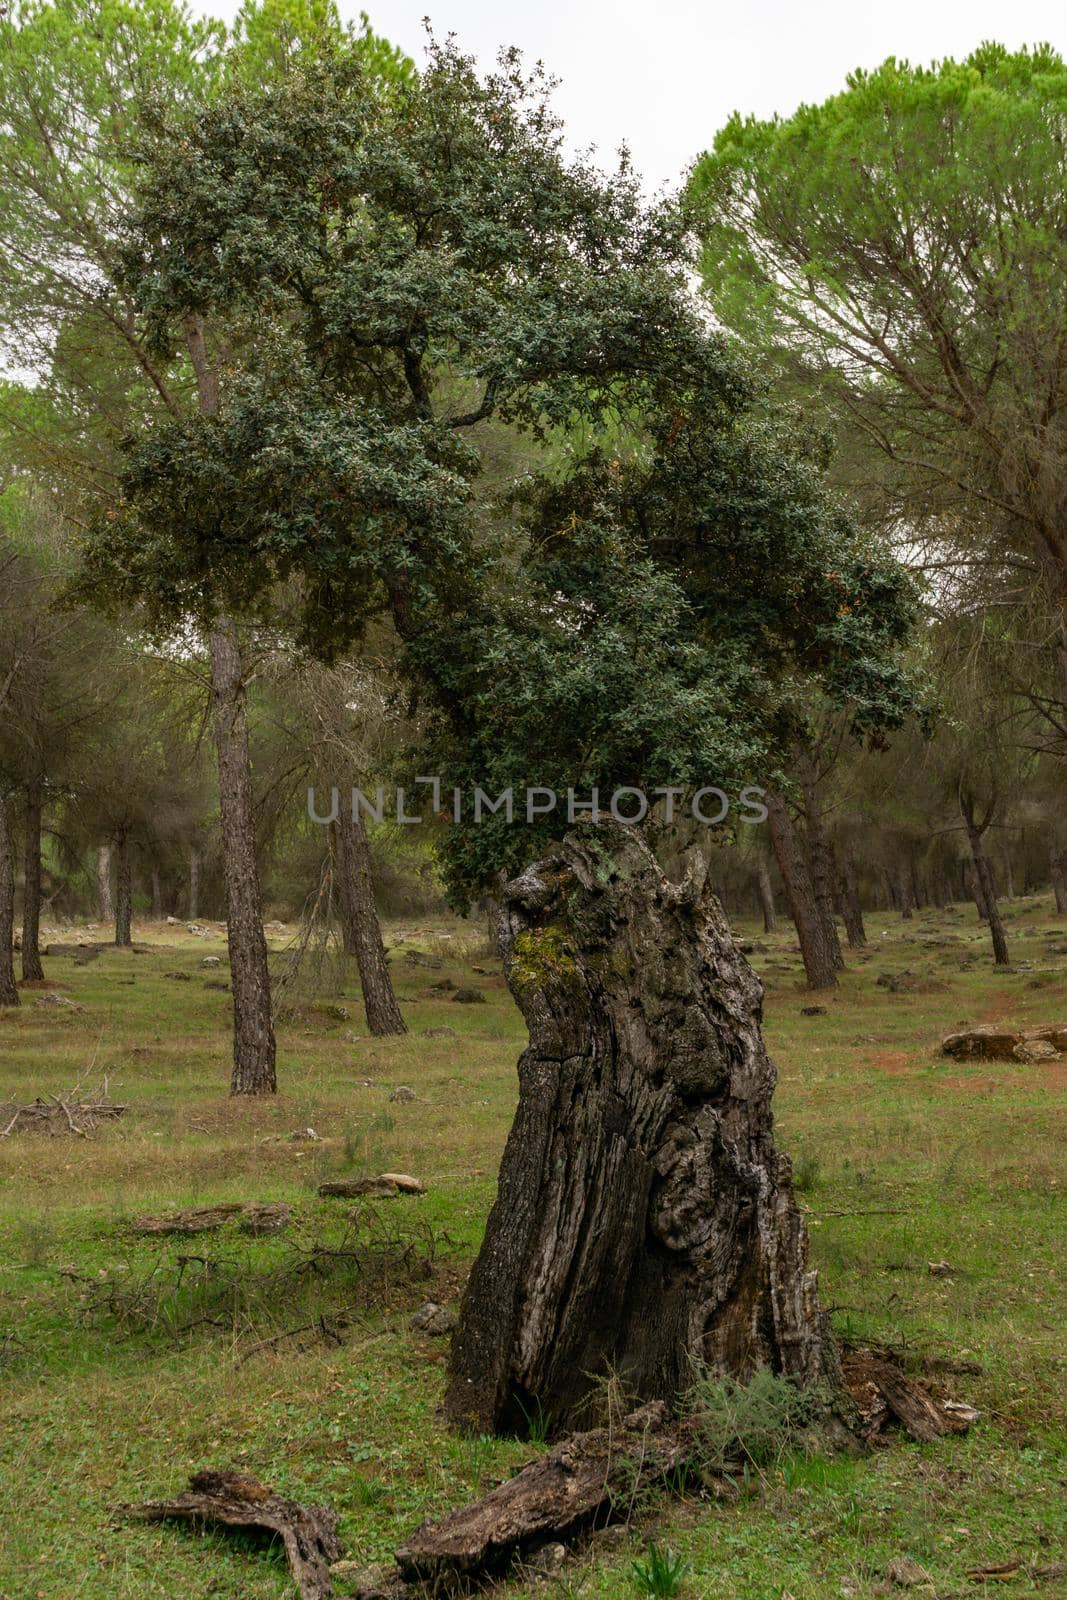 Holm oak or Quercus ilex in the foreground with moss on the trunk by joseantona